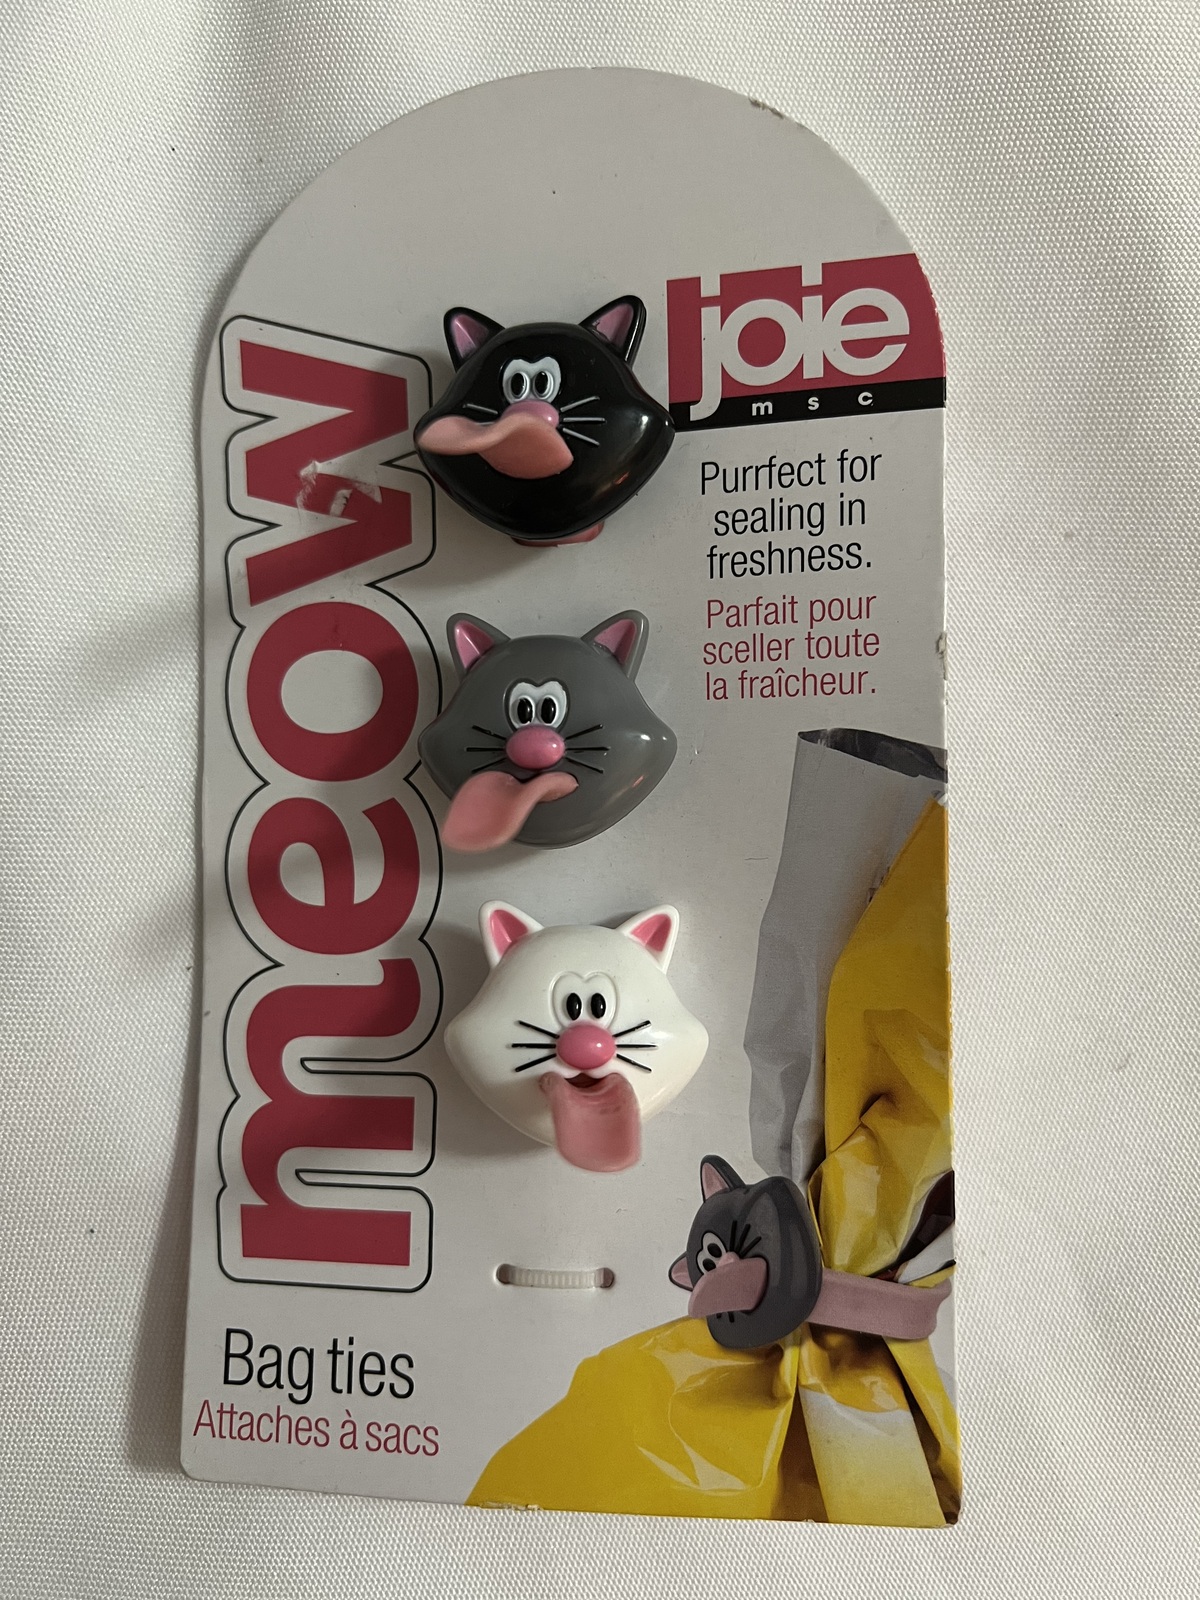 Joie Meow cat Bag Ties Silicone ( Set of 3 ) - $6.00